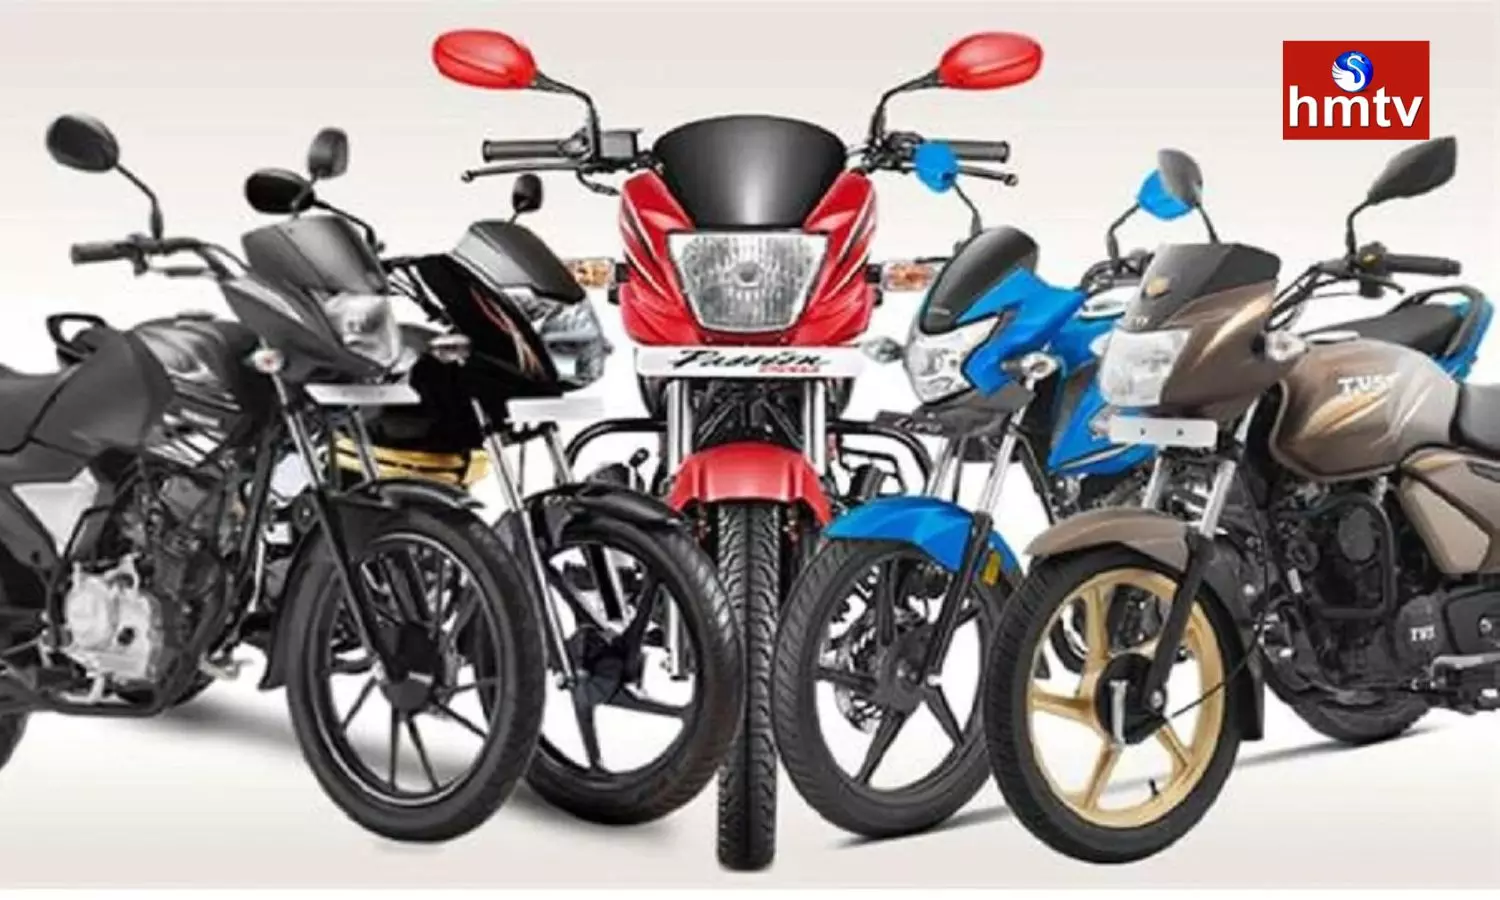 More Than 70 km Mileage With Best Features Check These Top 10 Bikes in India